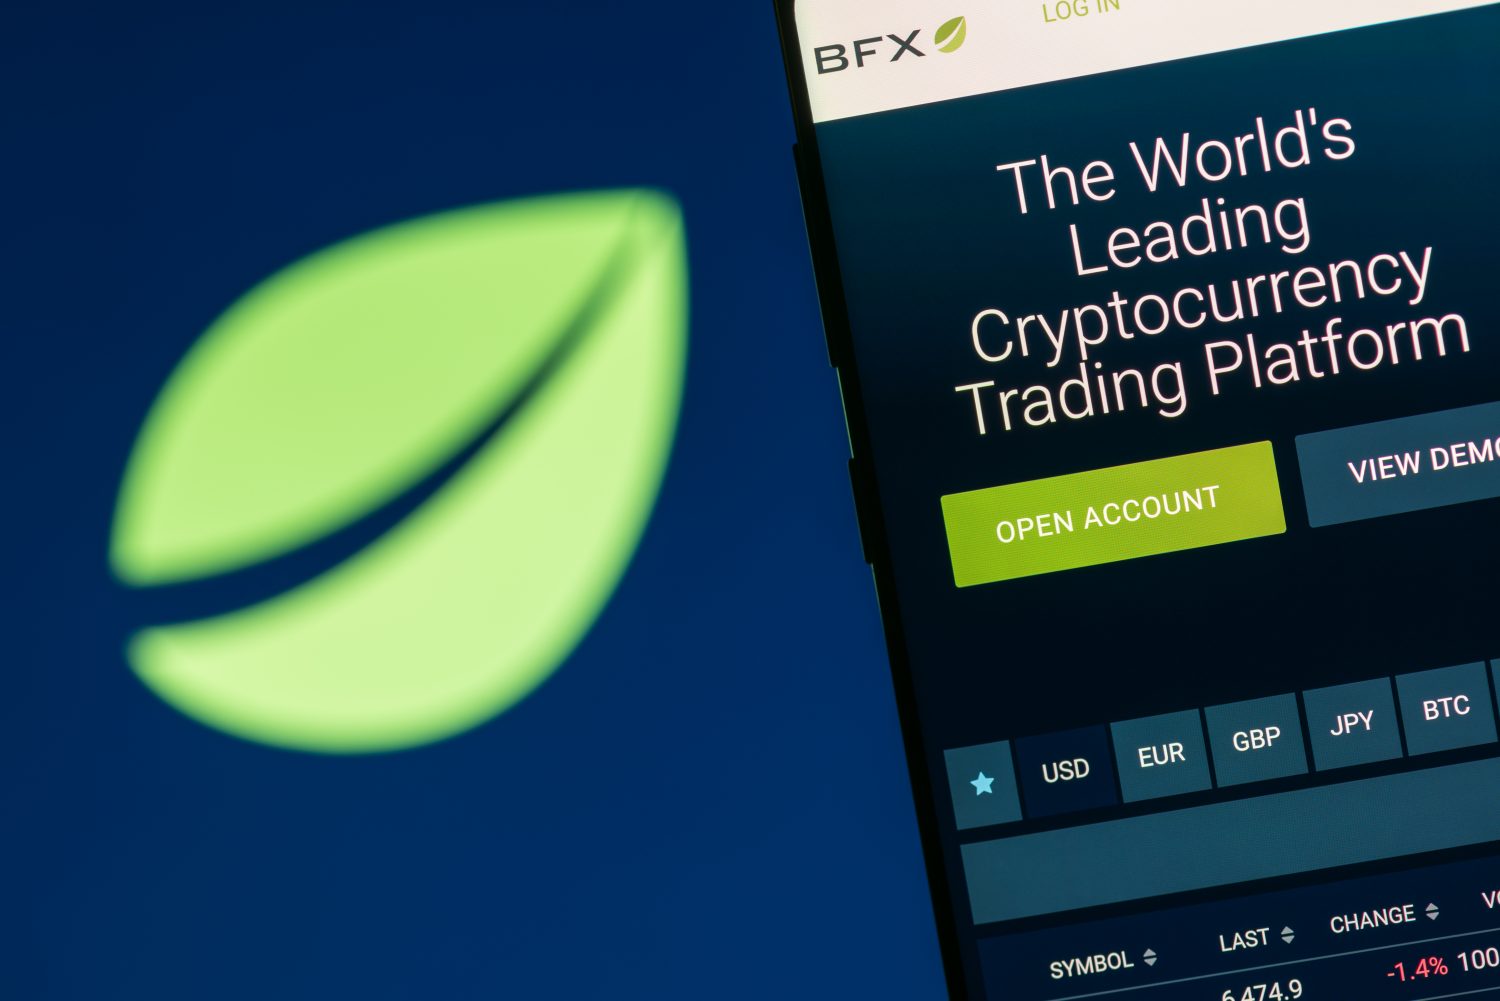 $500K, 60 Lawyers: Filing Reveals Costs Of Bitfinex’s Fight With NY Regulators